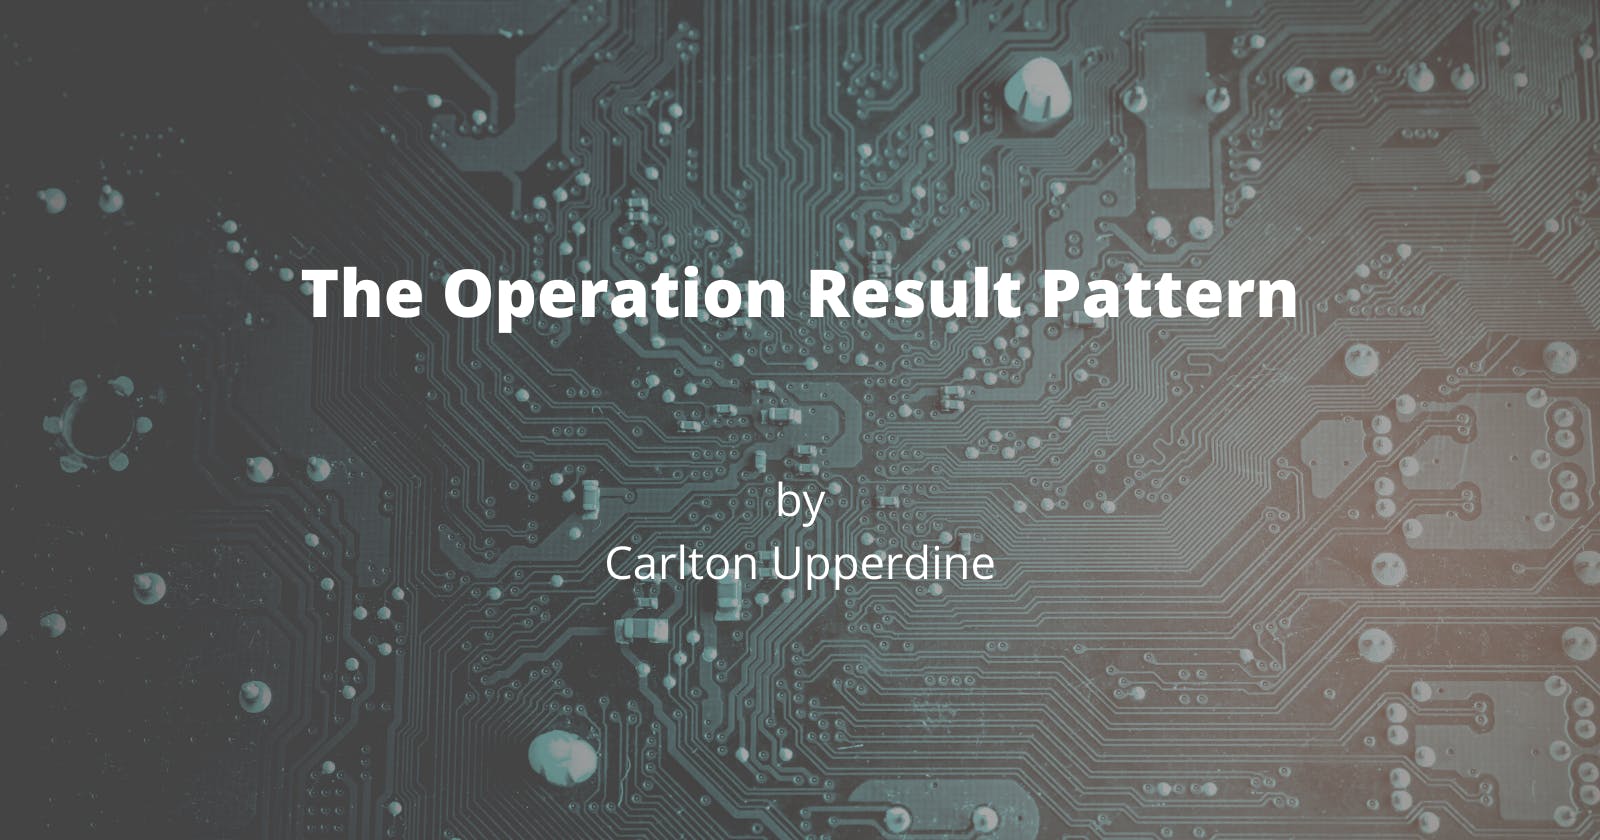 The Operation Result Pattern